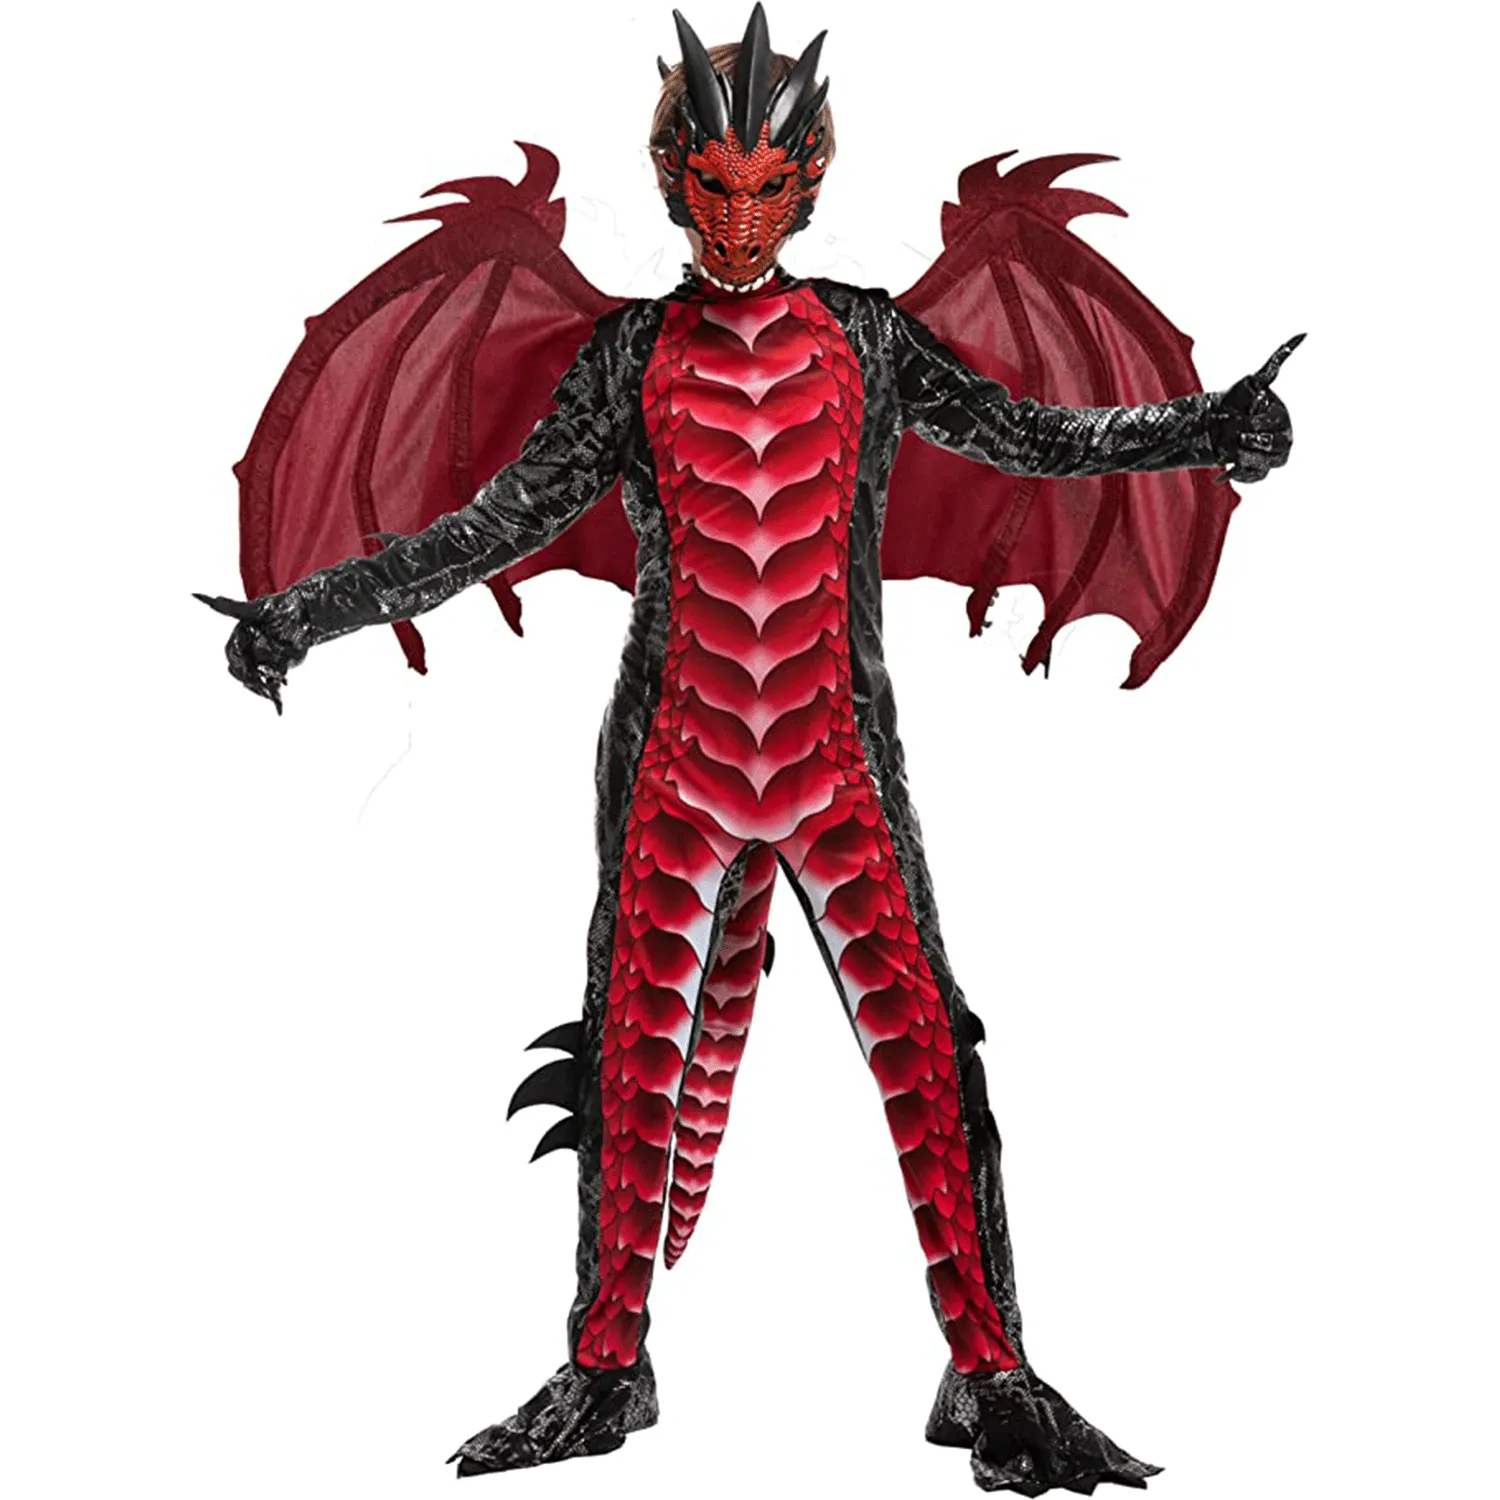 Absolute pile Overcome Best Child Halloween Black and Red Dragon Costume